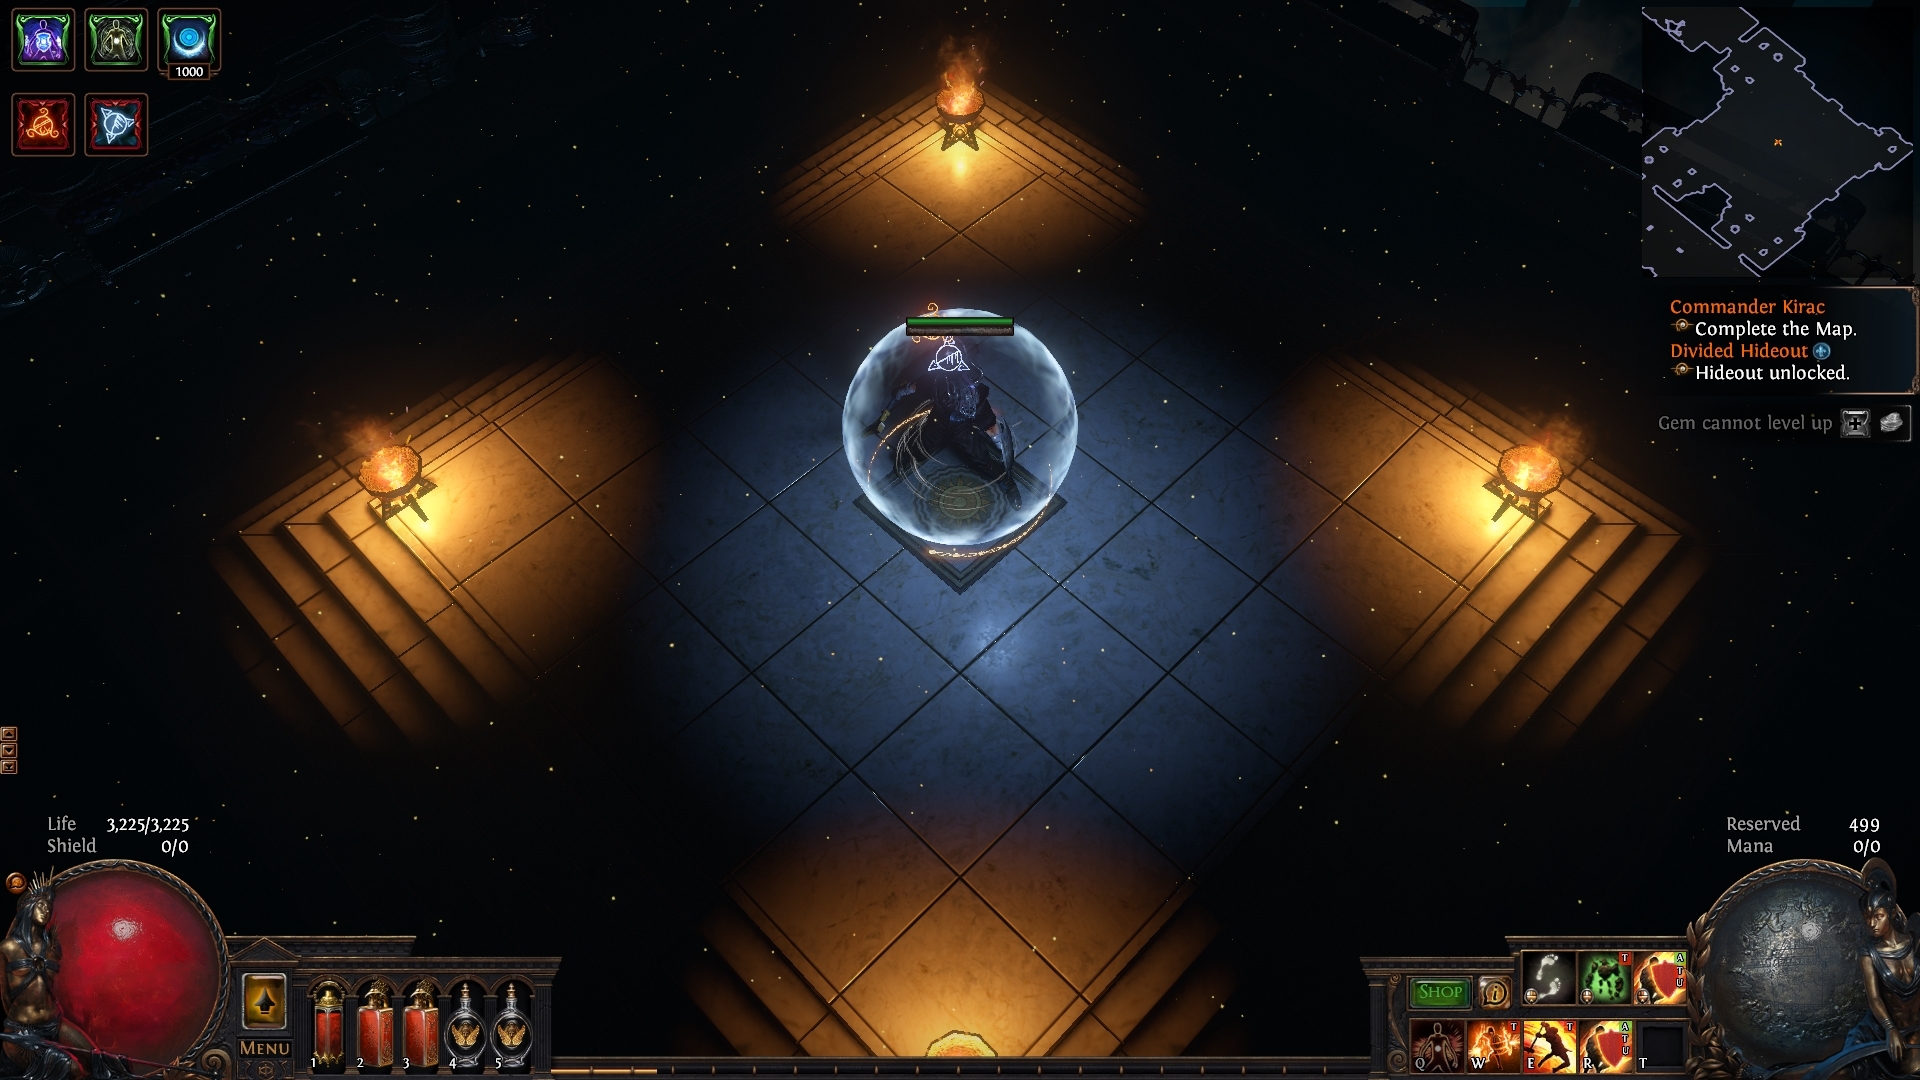 Bug Reports - The Twilight Temple (bugged buttons) - Forum - Path of Exile